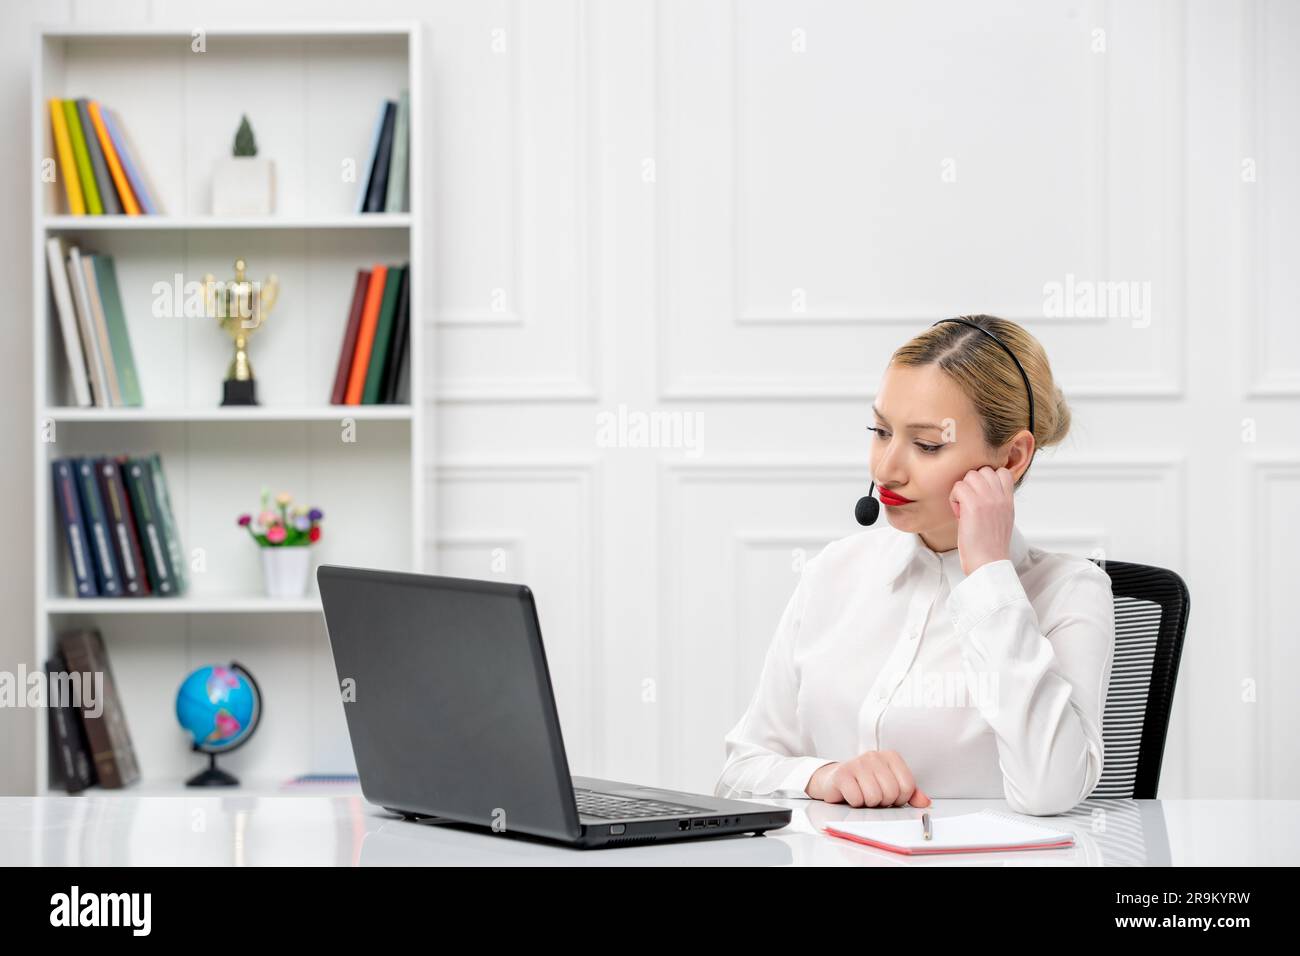 customer service cute blonde girl office shirt with headset and computer thinking Stock Photo